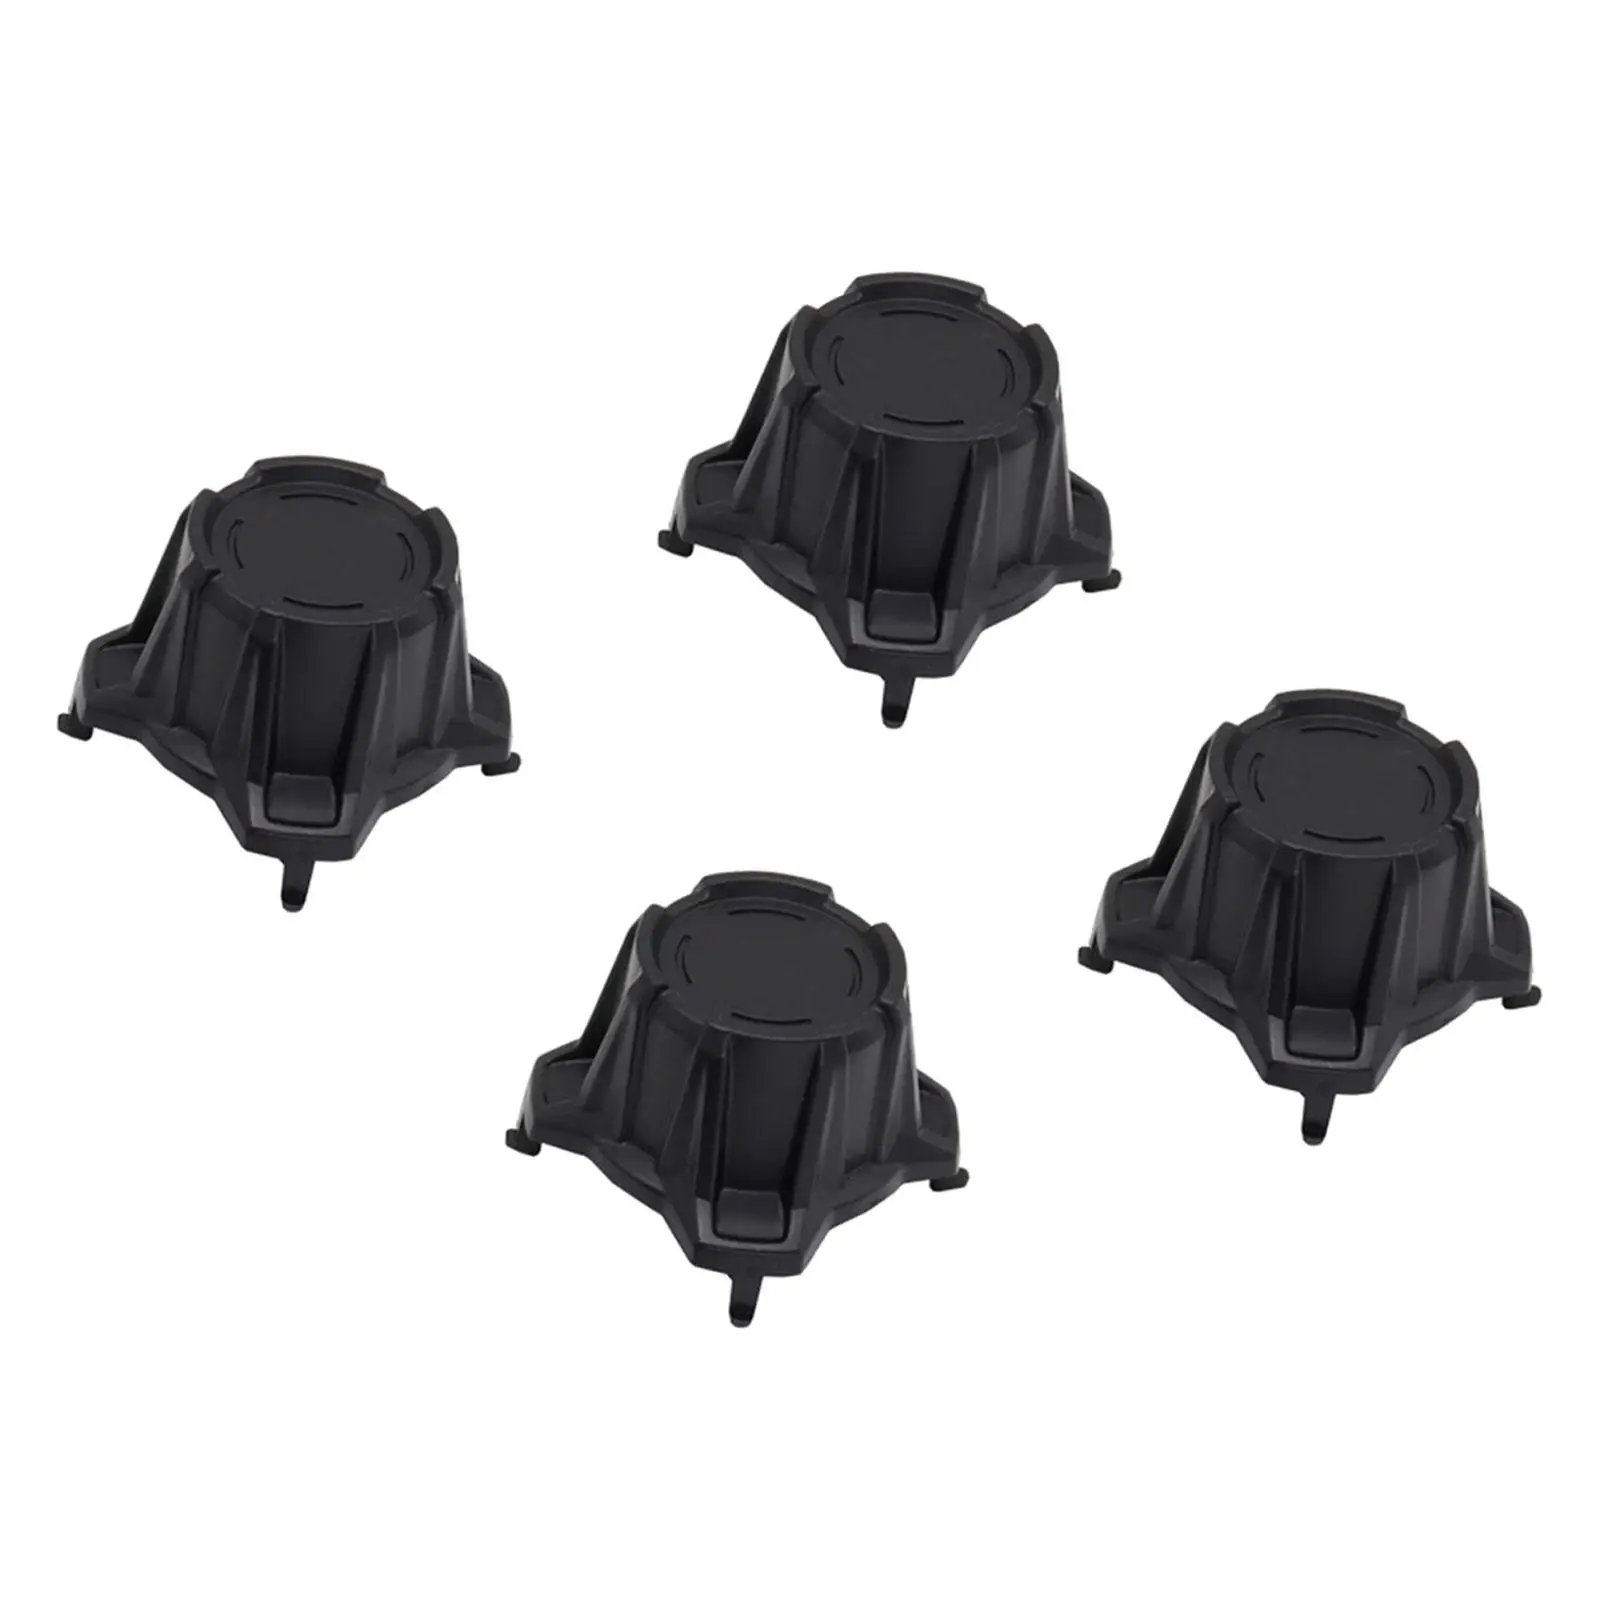 4Pcs Tire Wheel Hub Caps Motorcycle Easy to Install Spare Parts PP Repair for x3 Premium Long Service Life Easily Install